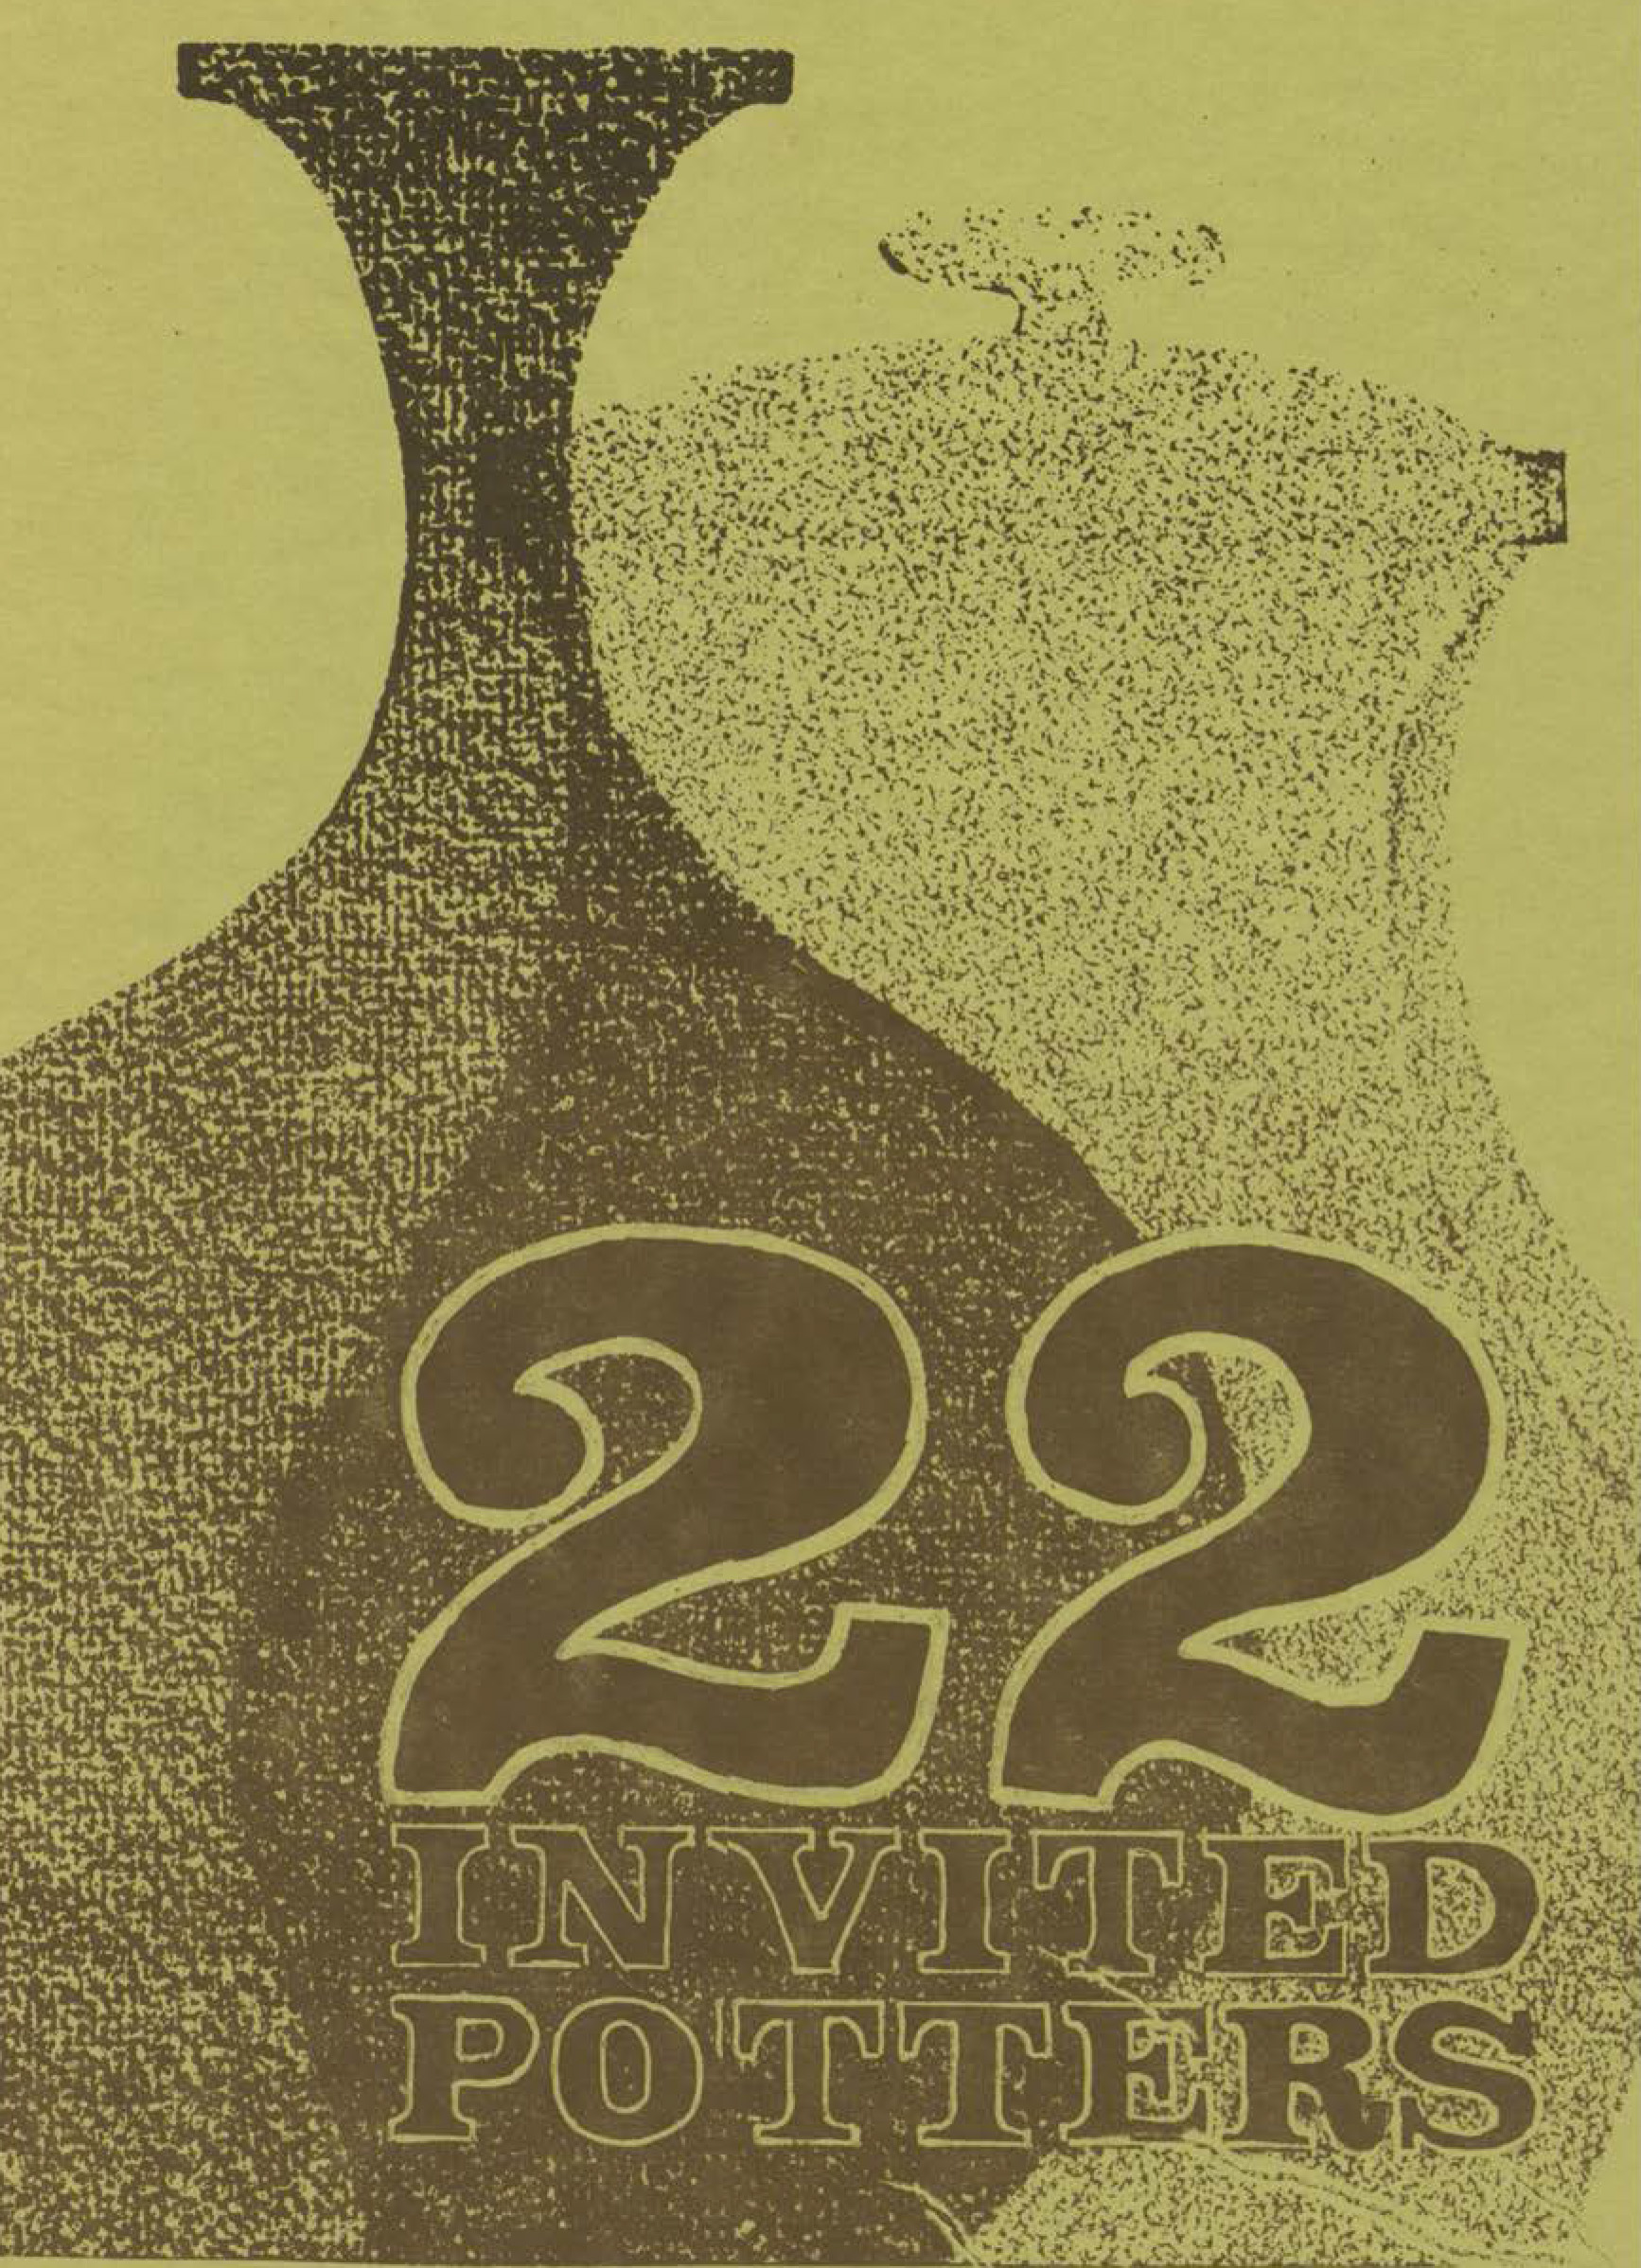 Catalogue cover featuring an abstract print of two pots, and text 22 invited potters, in brown on a yellow background.